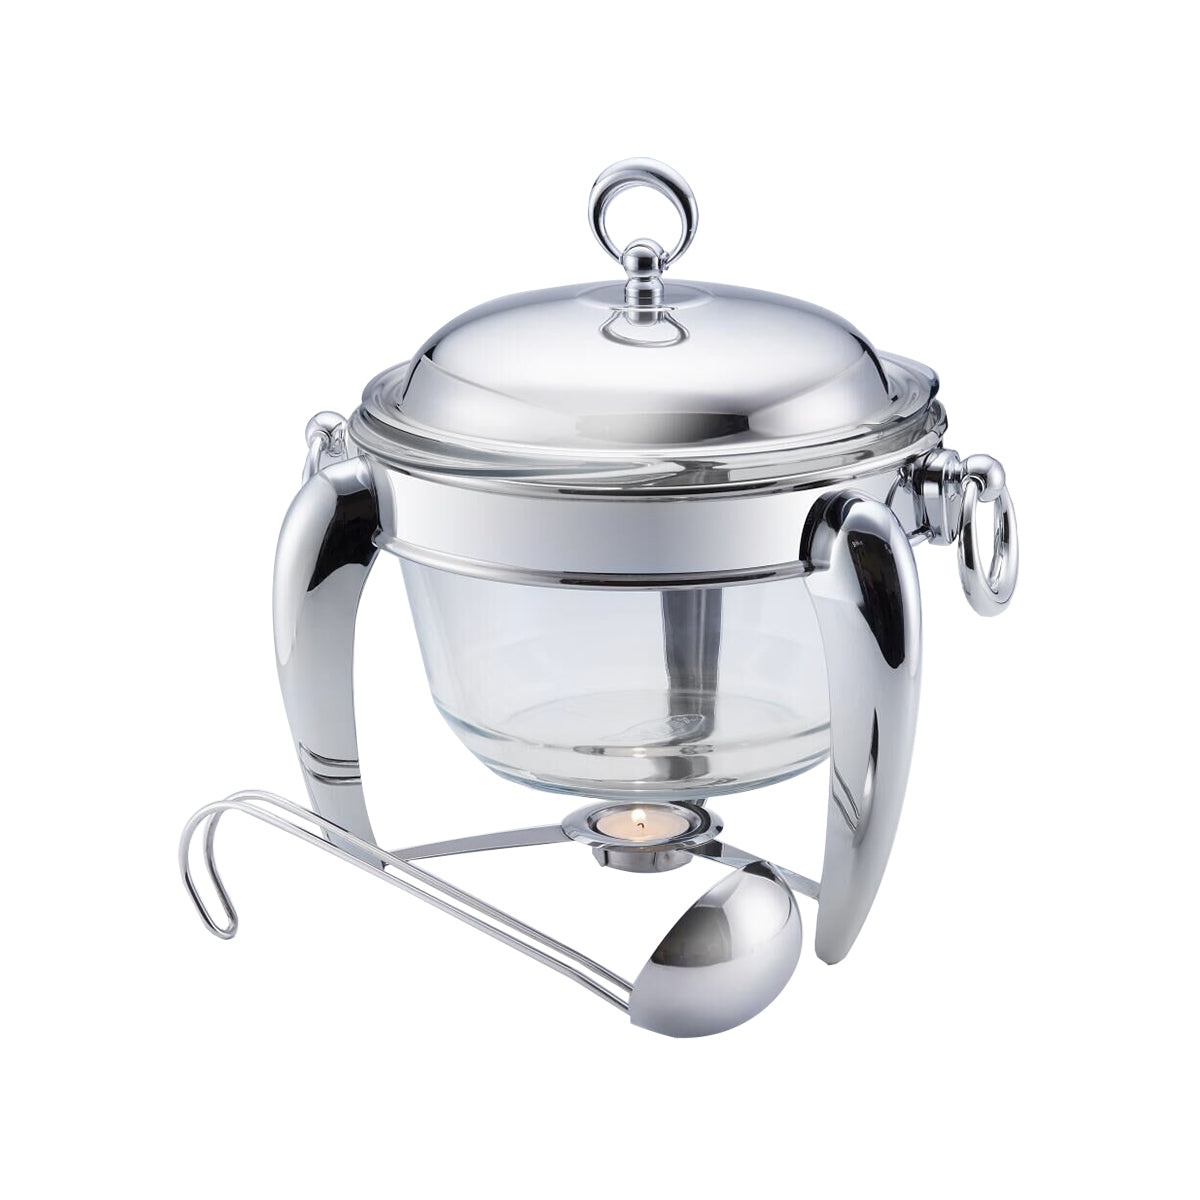 ﻿Soup Warmer with Ladle -4.0 Lit. -Stainless Steel 18/10 & Tempered Glass